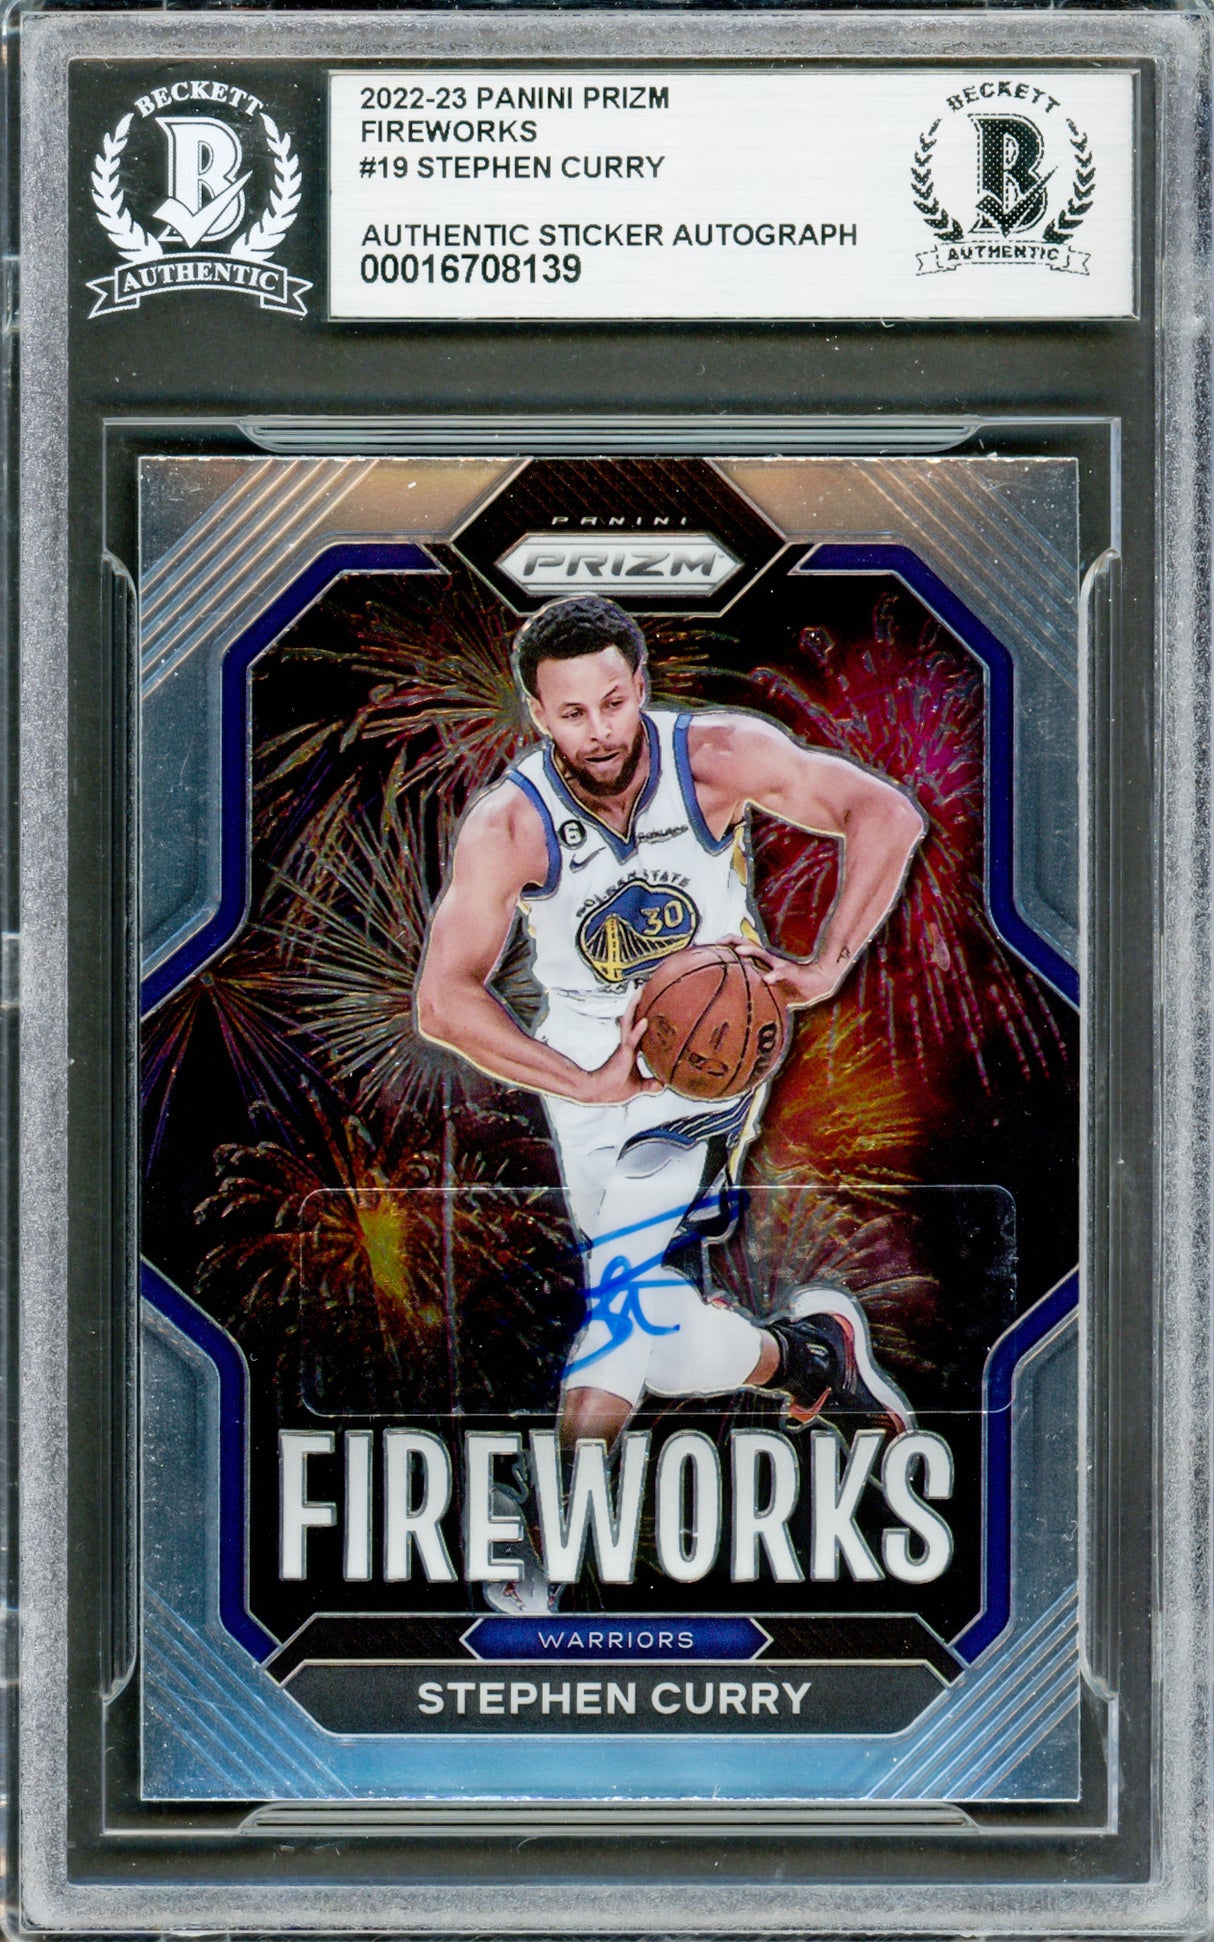 Stephen Curry Autographed 2022-23 Panini Prizm Fireworks Card #19 Golden State Warriors Beckett BAS #16708139